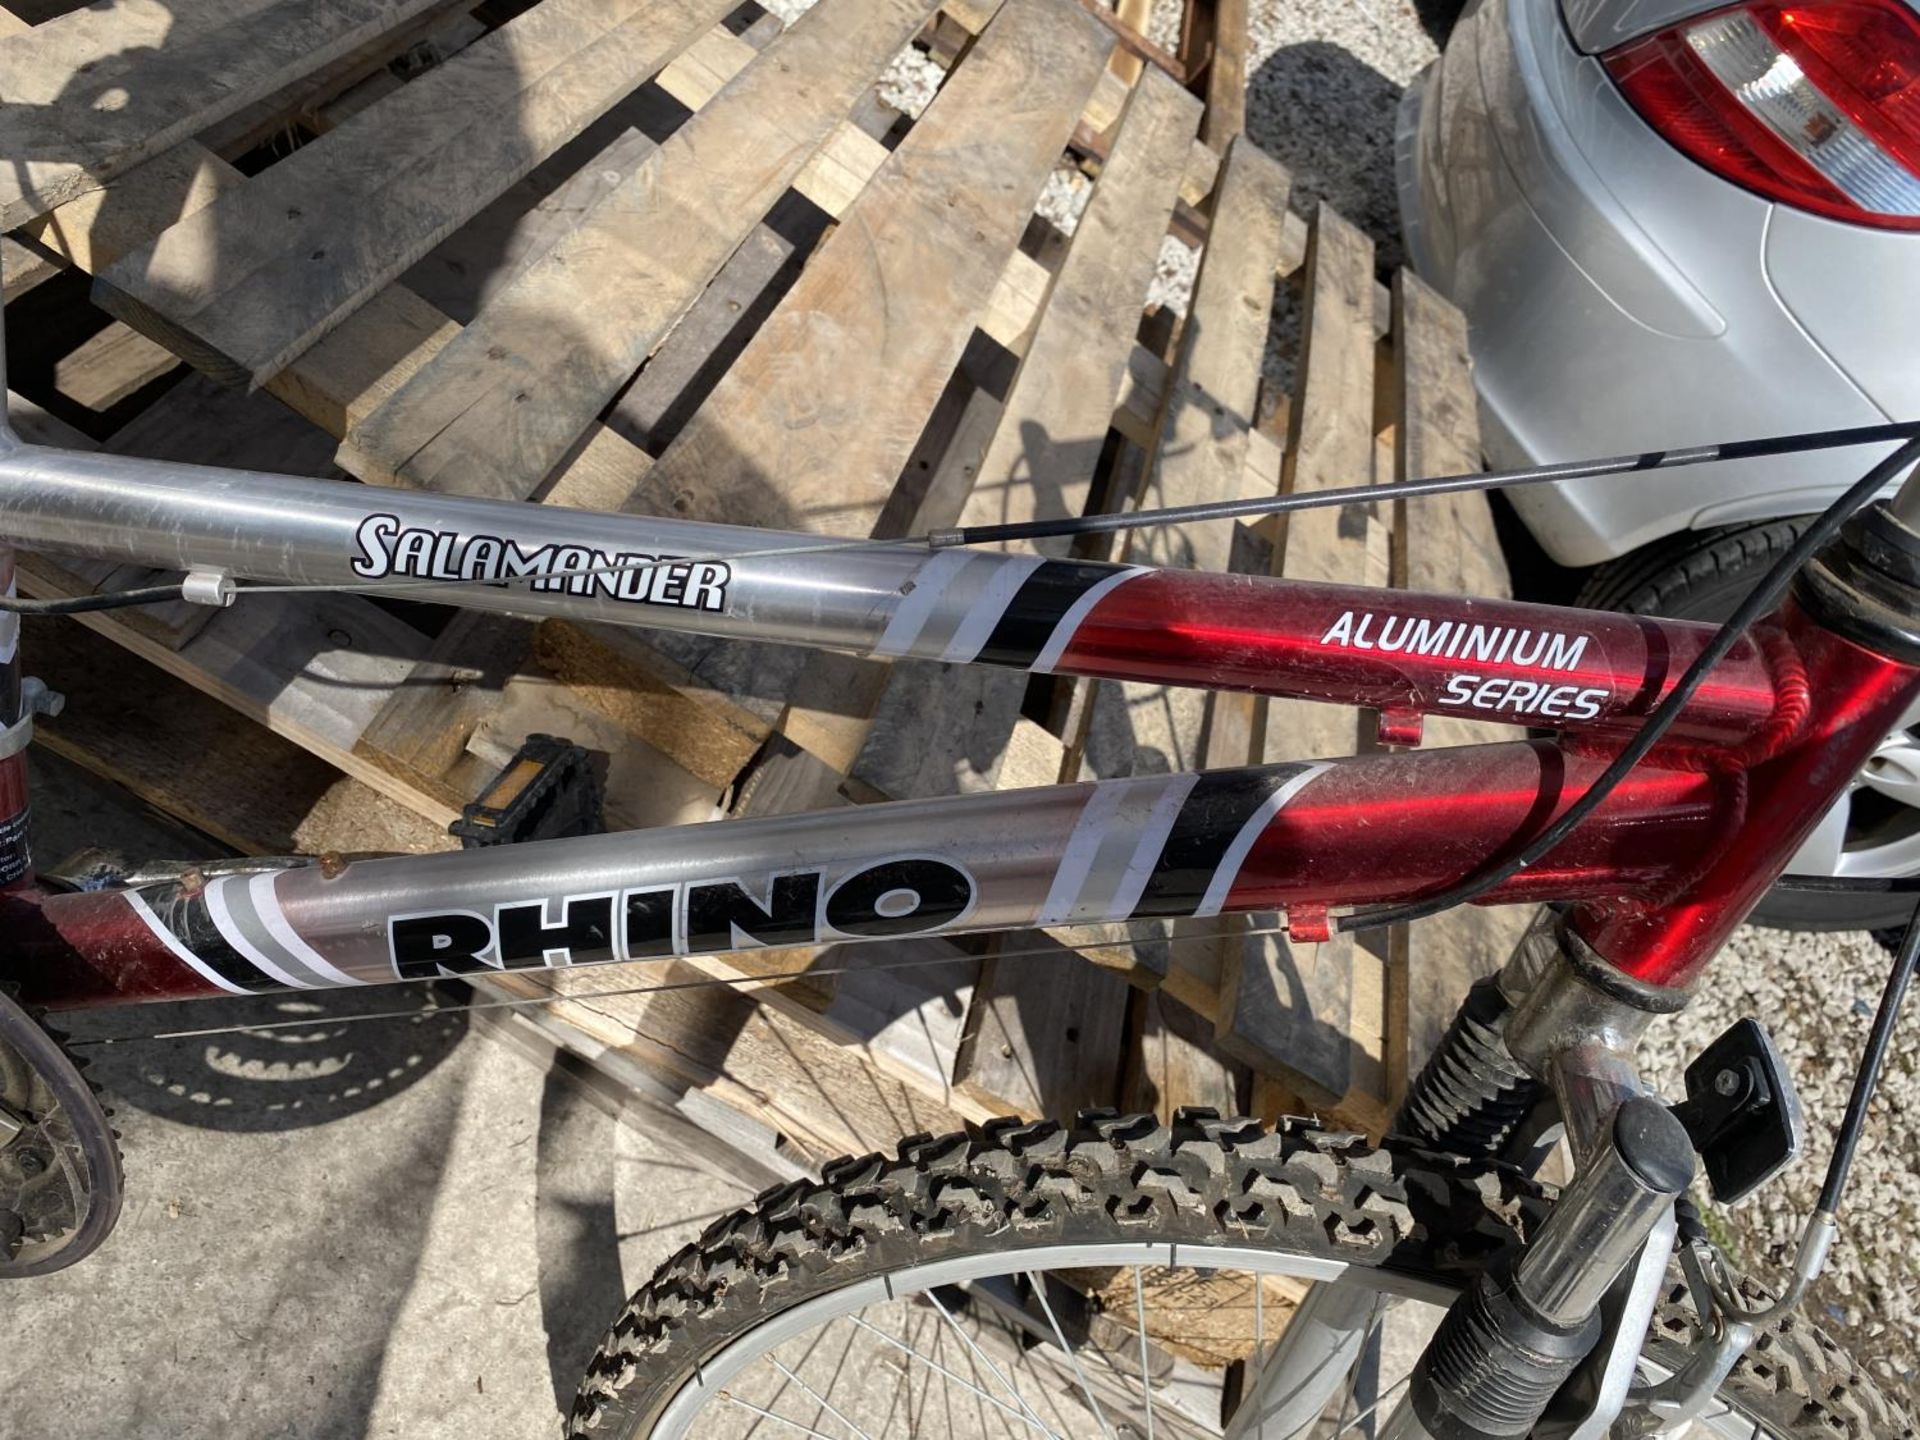 A RHINO SALAMANDER MOUNTAIN BIKE WITH 21 SPEED GEAR SYSTEM - Image 2 of 5